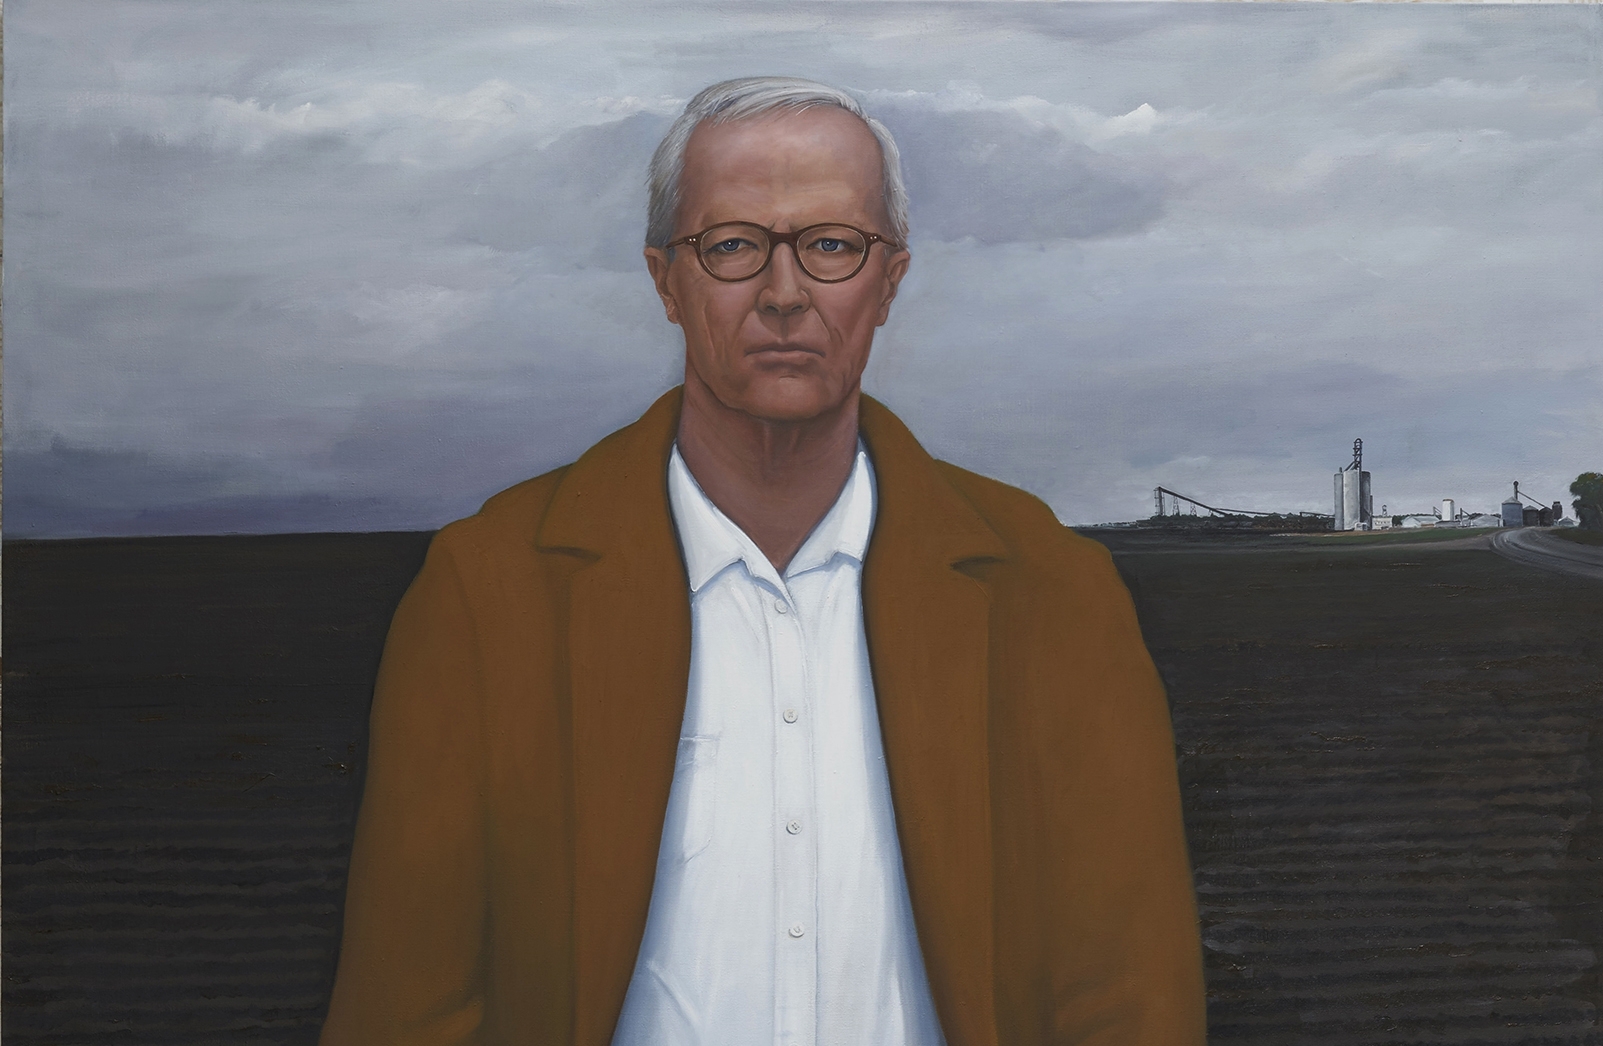 ​William Beckman,&nbsp;Overcoat with Plowed Field [detail], 2018-2019, oil on canvas, 100 x 73 inches